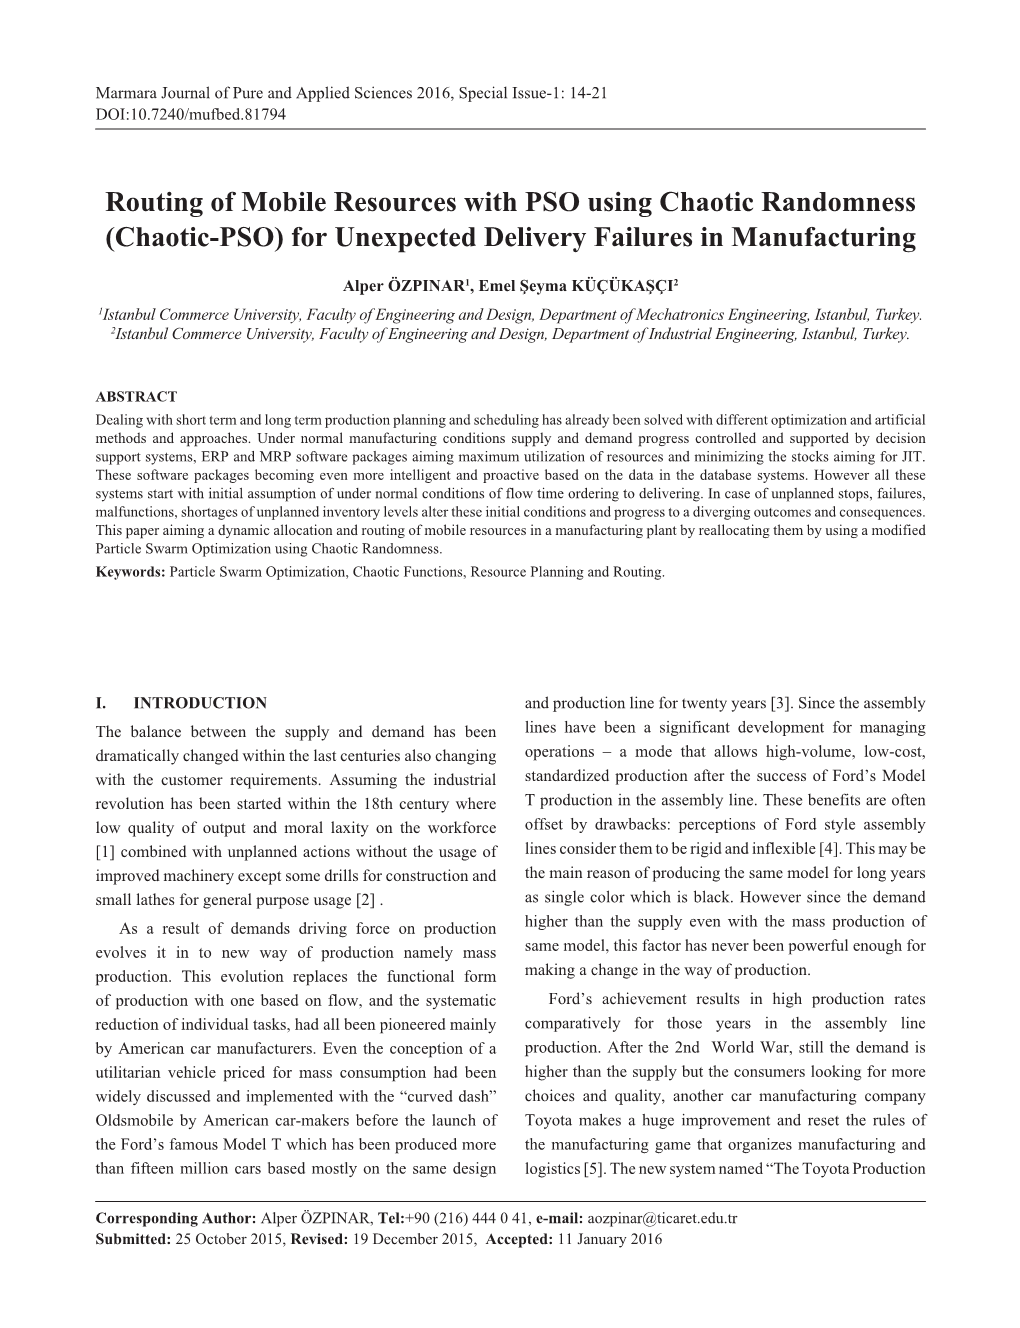 Routing of Mobile Resources with PSO Using Chaotic Randomness (Chaotic-PSO) for Unexpected Delivery Failures in Manufacturing